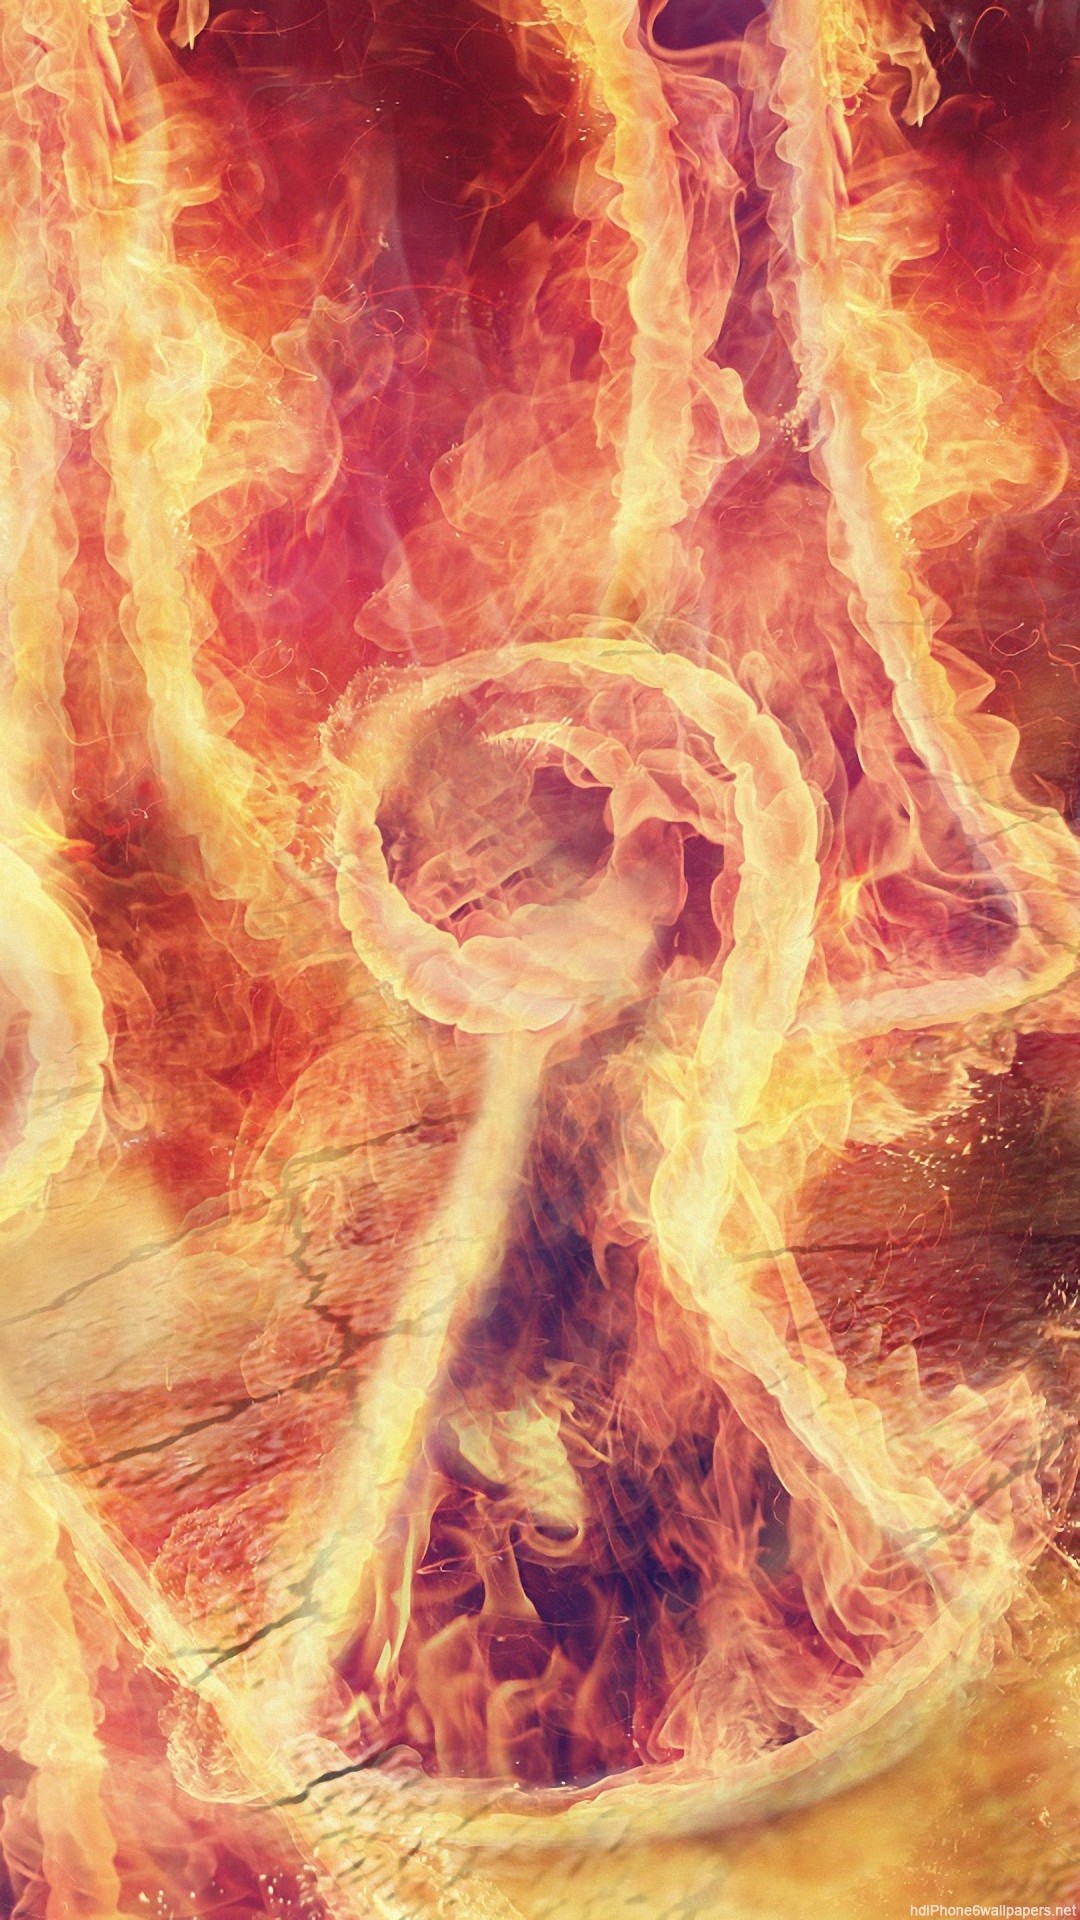 cool fire wallpapers,flame,fire,heat,cg artwork,space